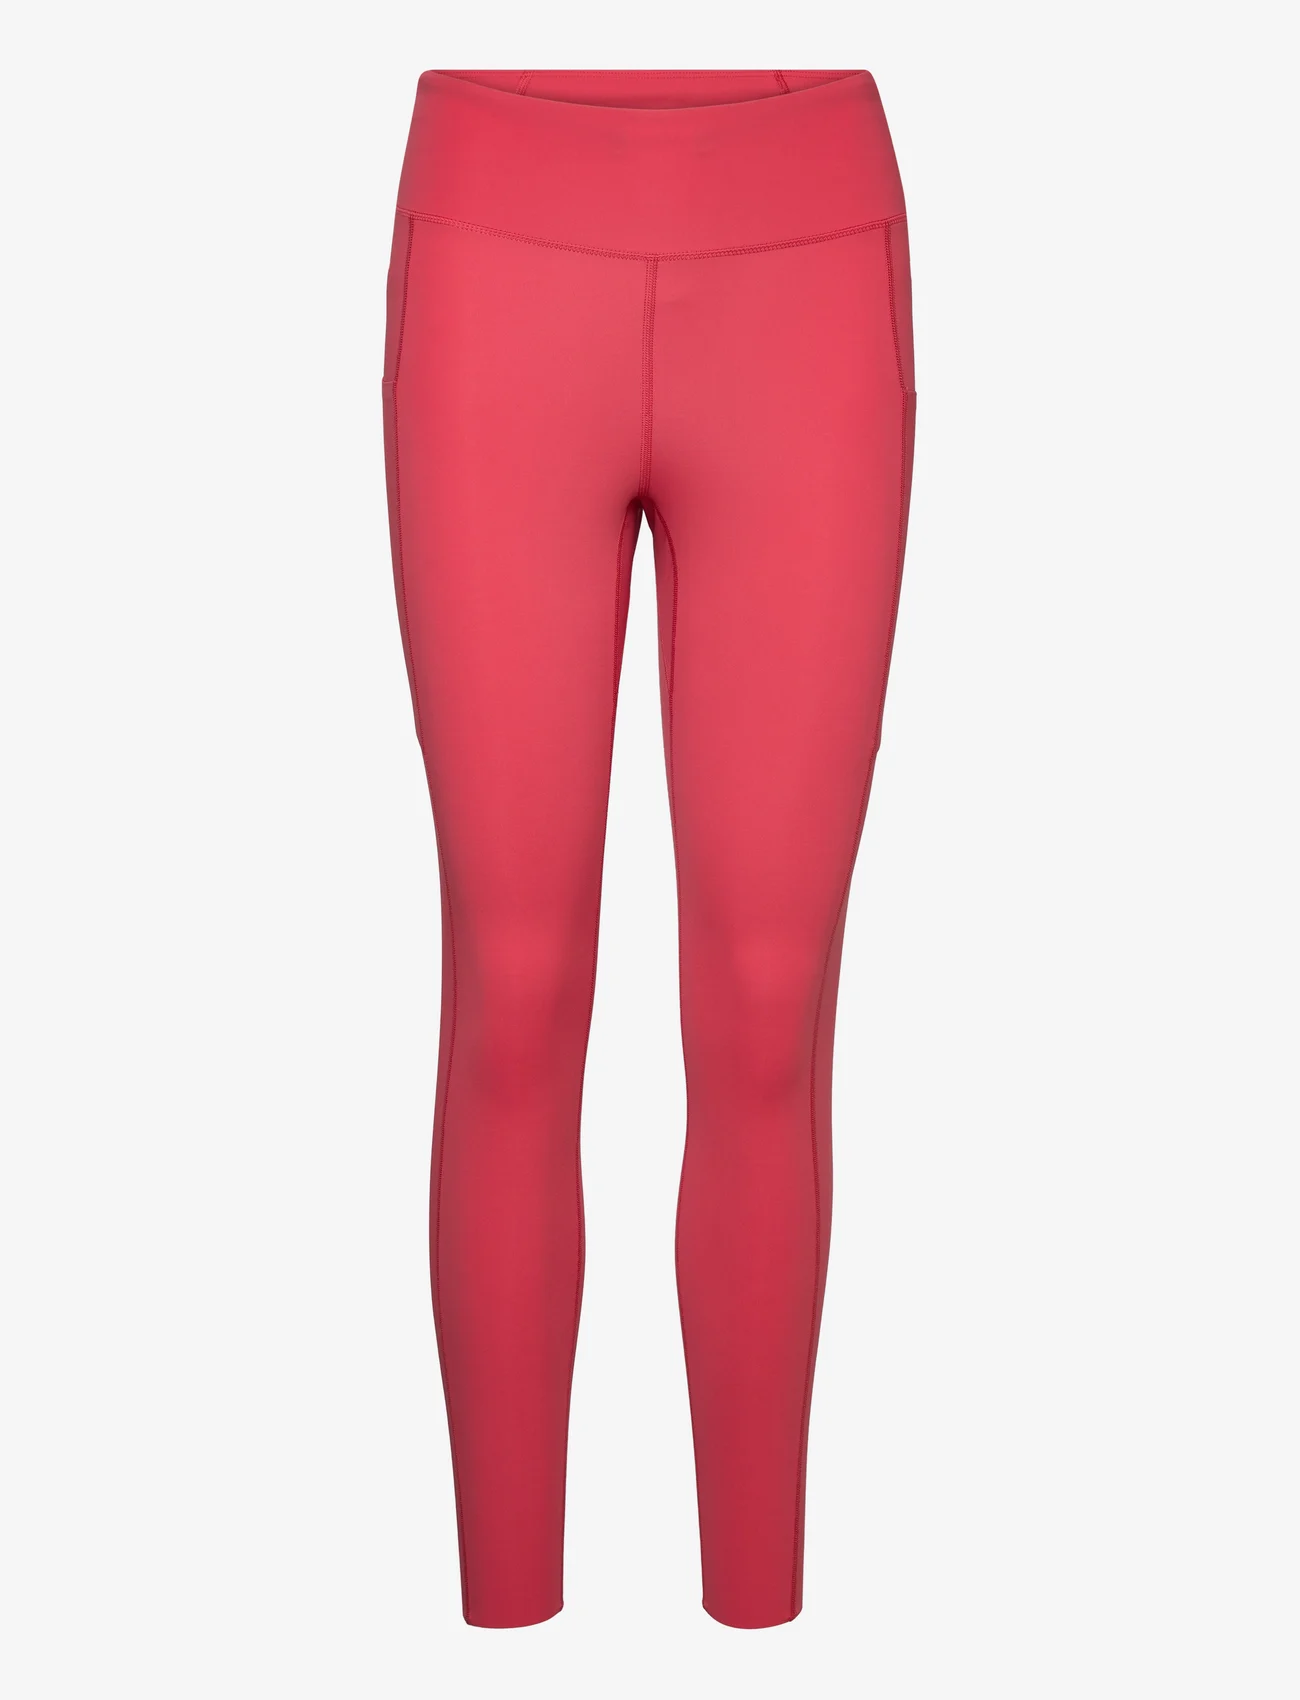 Peak Performance - W Power Tights-SOFTER RED - träningstights - softer red - 0